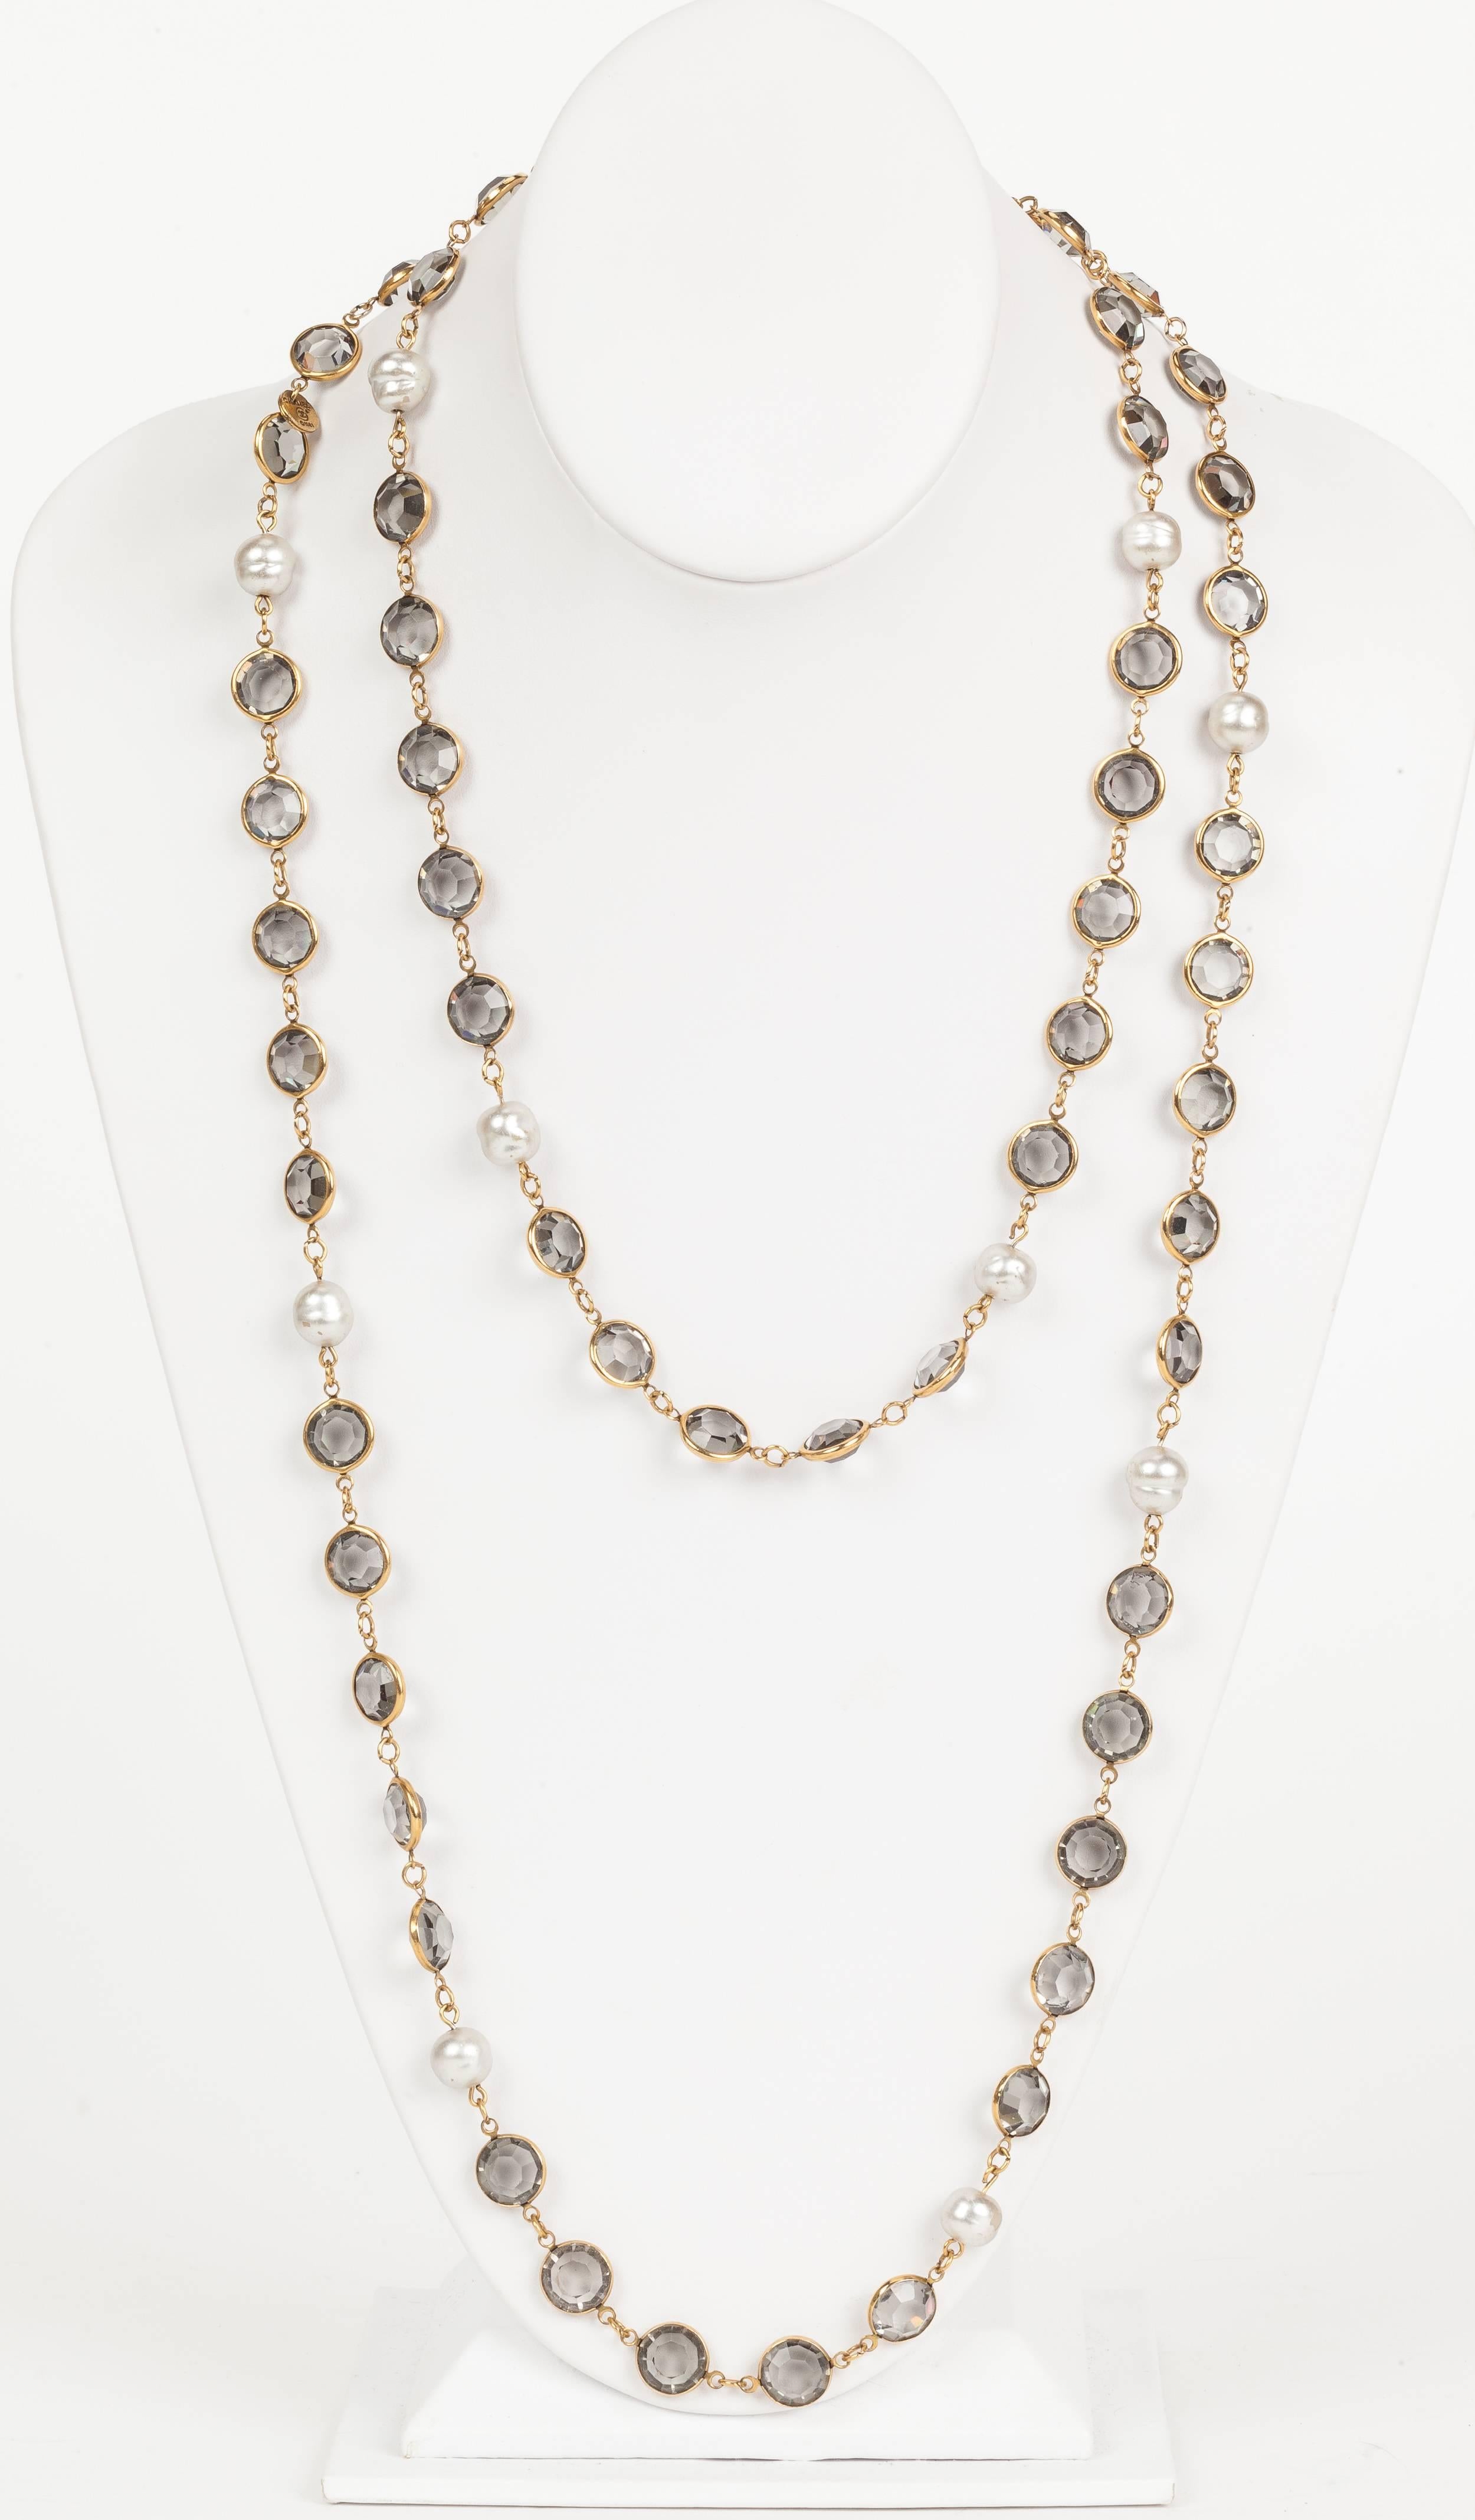 A 1981 Chanel sautoir necklace comprised of faux pearls and bezel-set smoky crystals in gold tone surrounds. In excellent condition. Stamped 